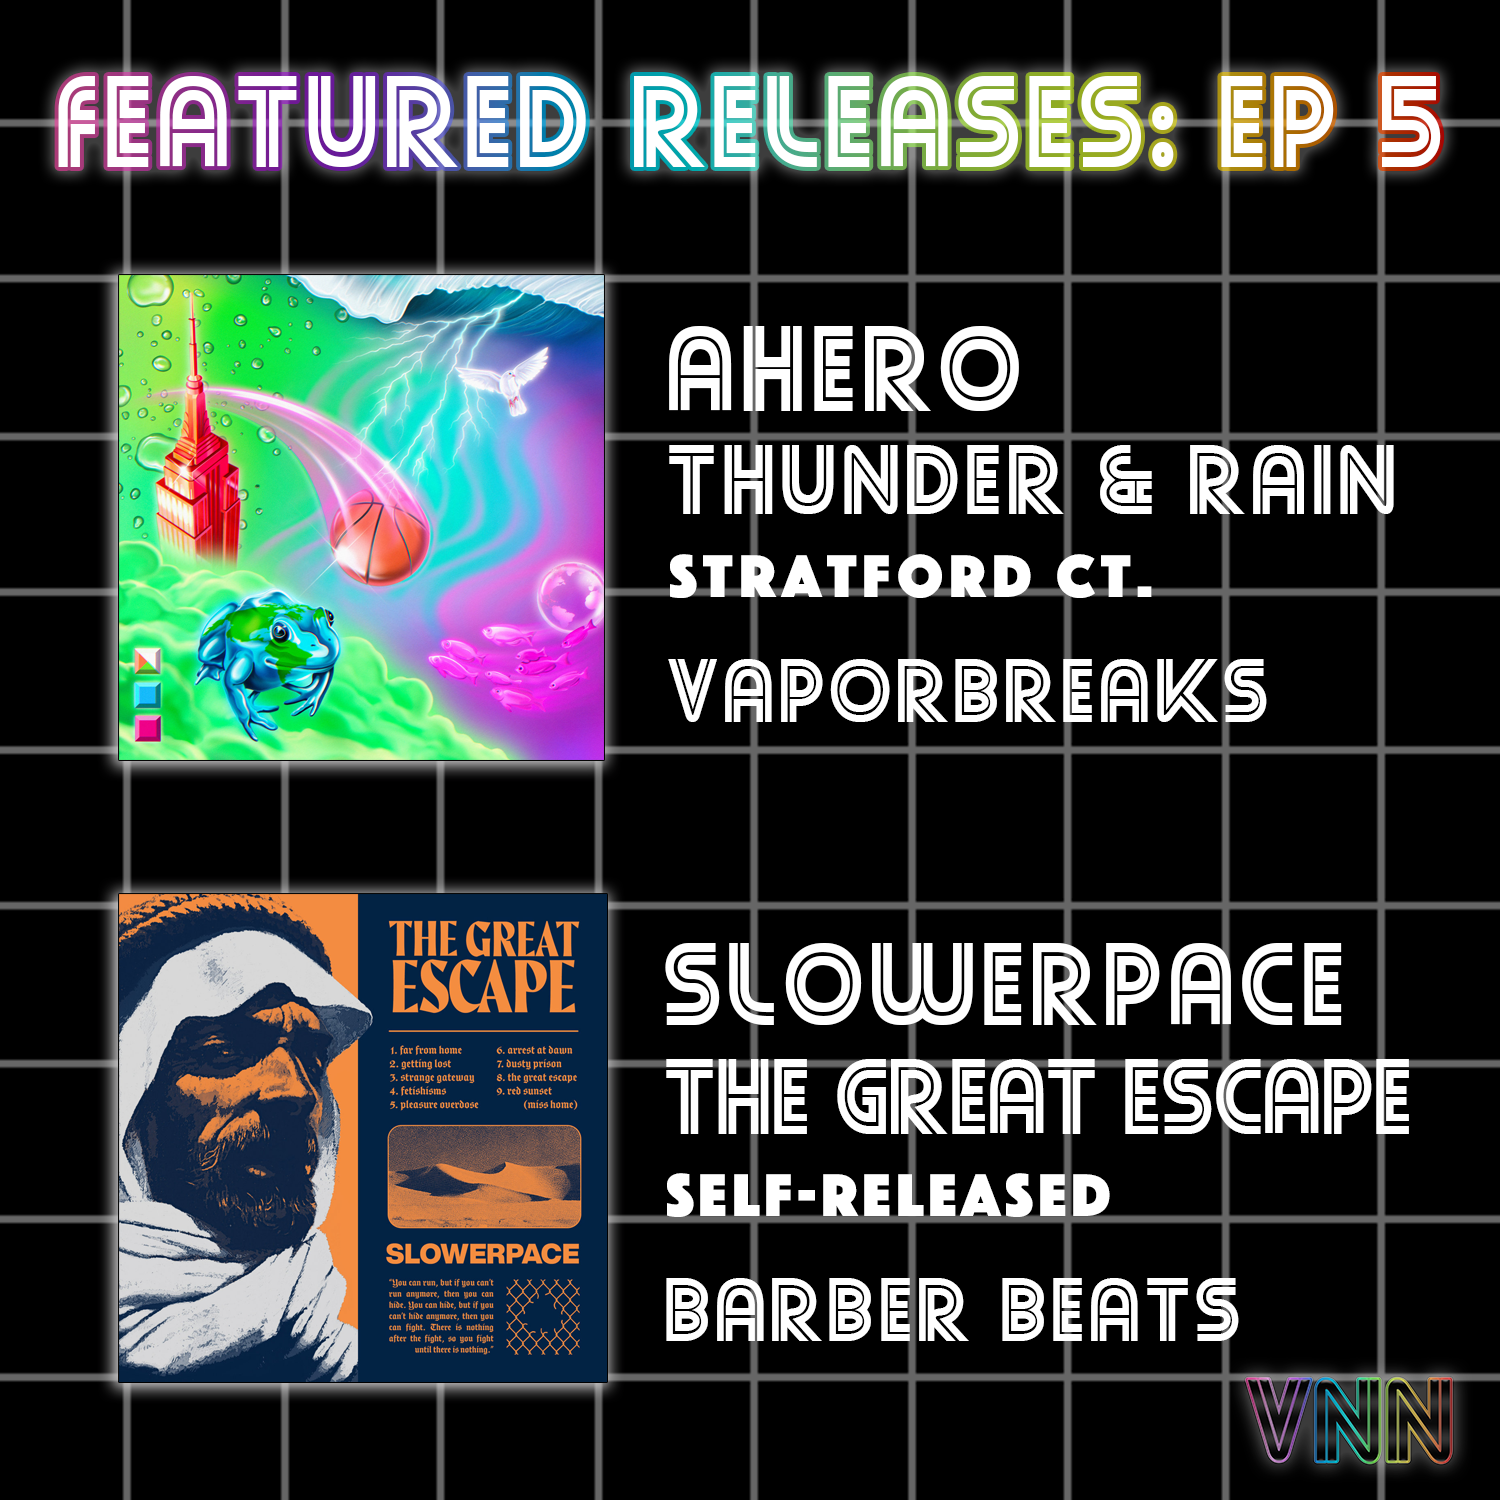 Featured Releases: Ahero - Thunder and Rain, slowerpace音楽 - The Great Escapep. 5)